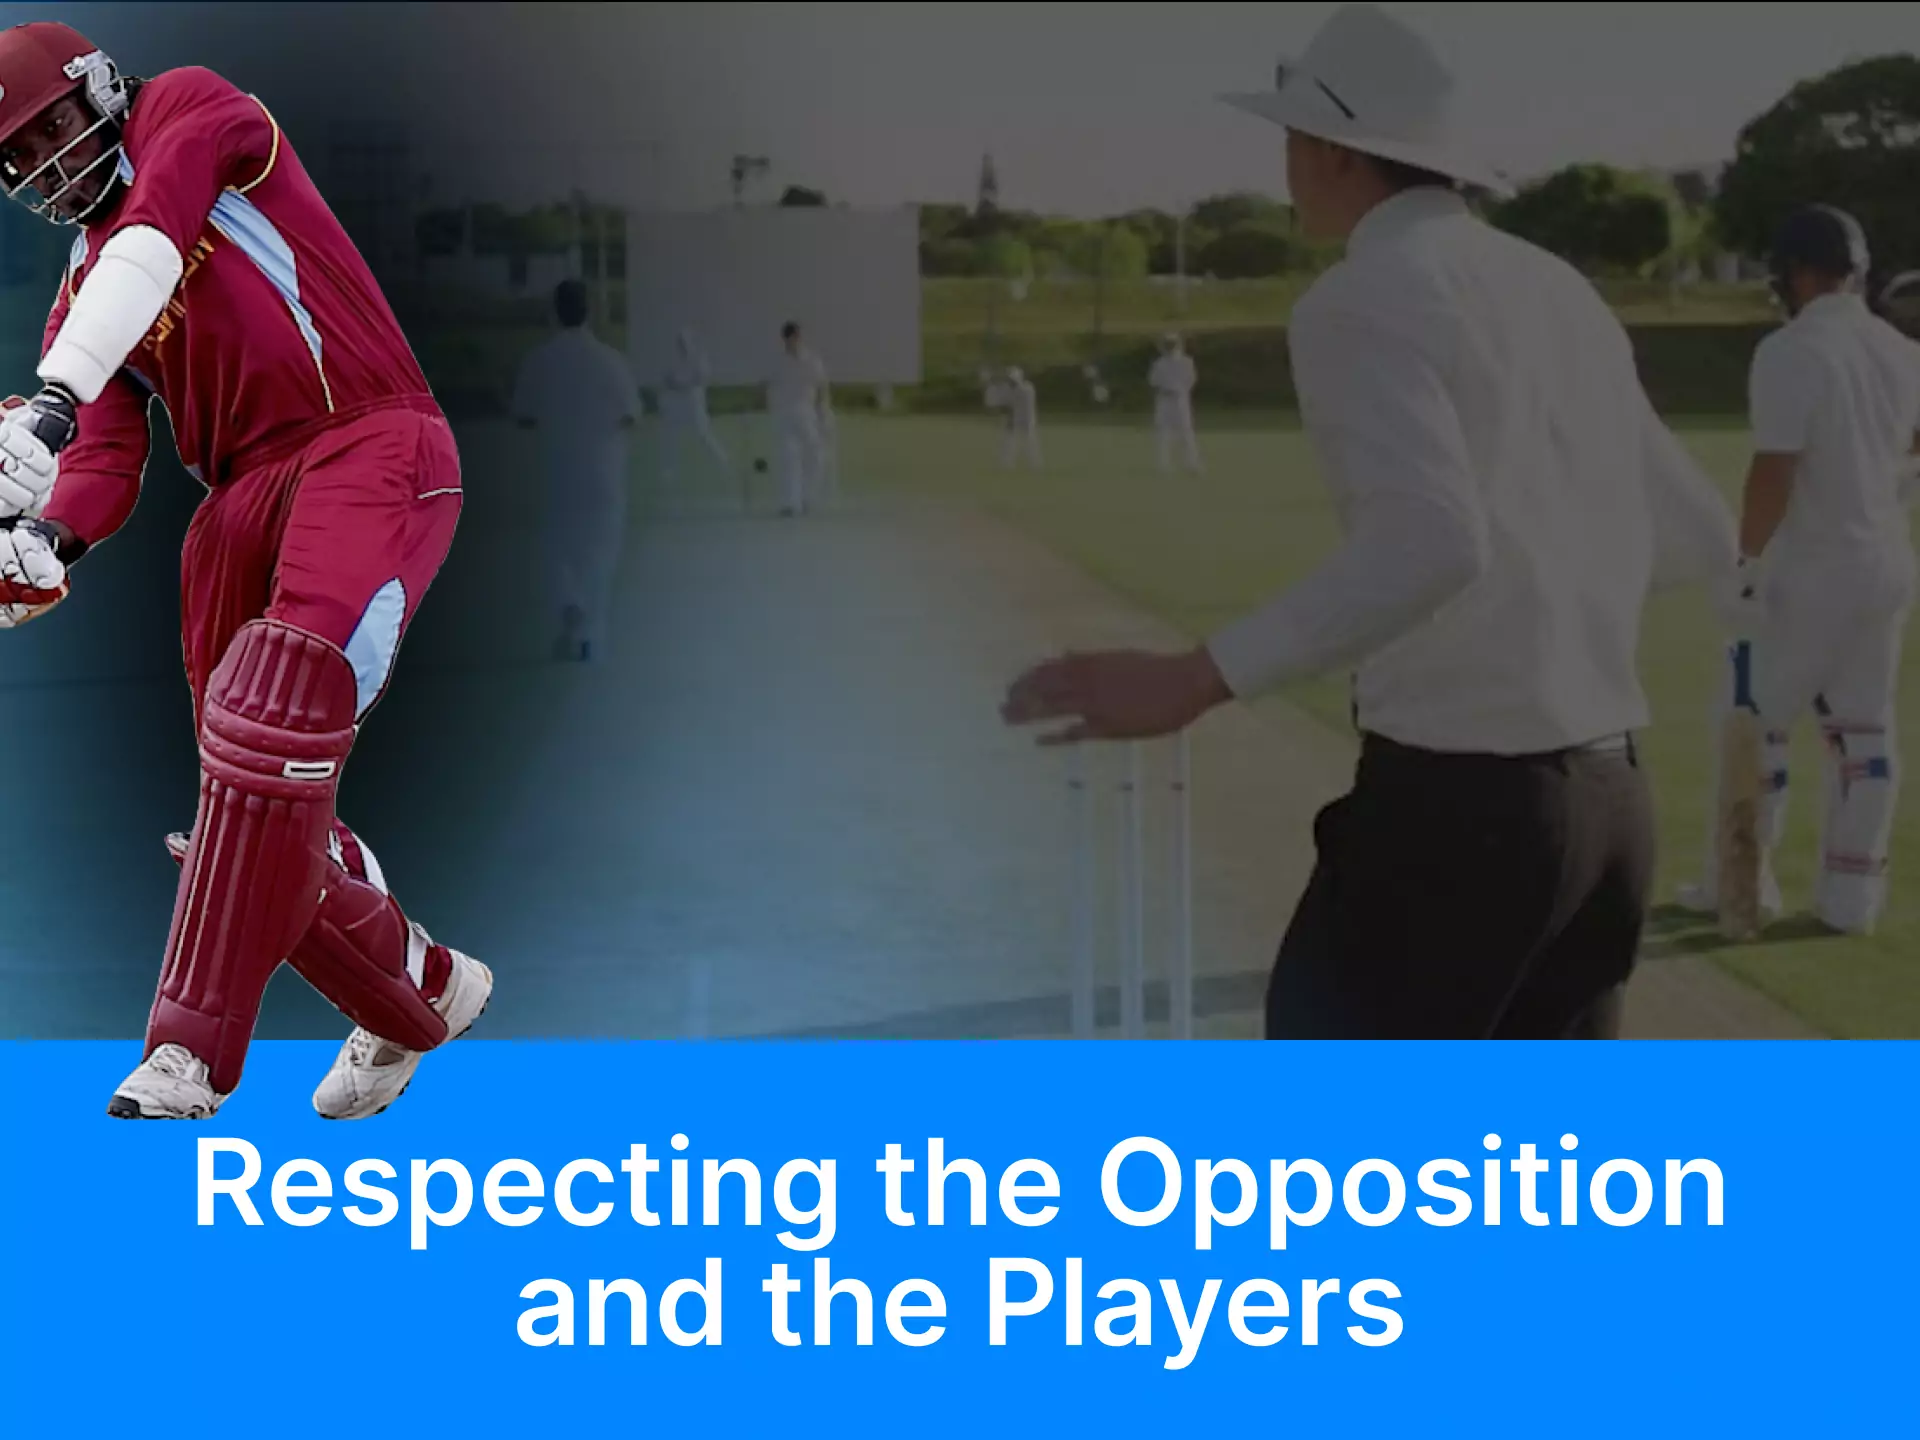 Learn what is consider polite in cricket and how to behave toward partners and opponents in the game.